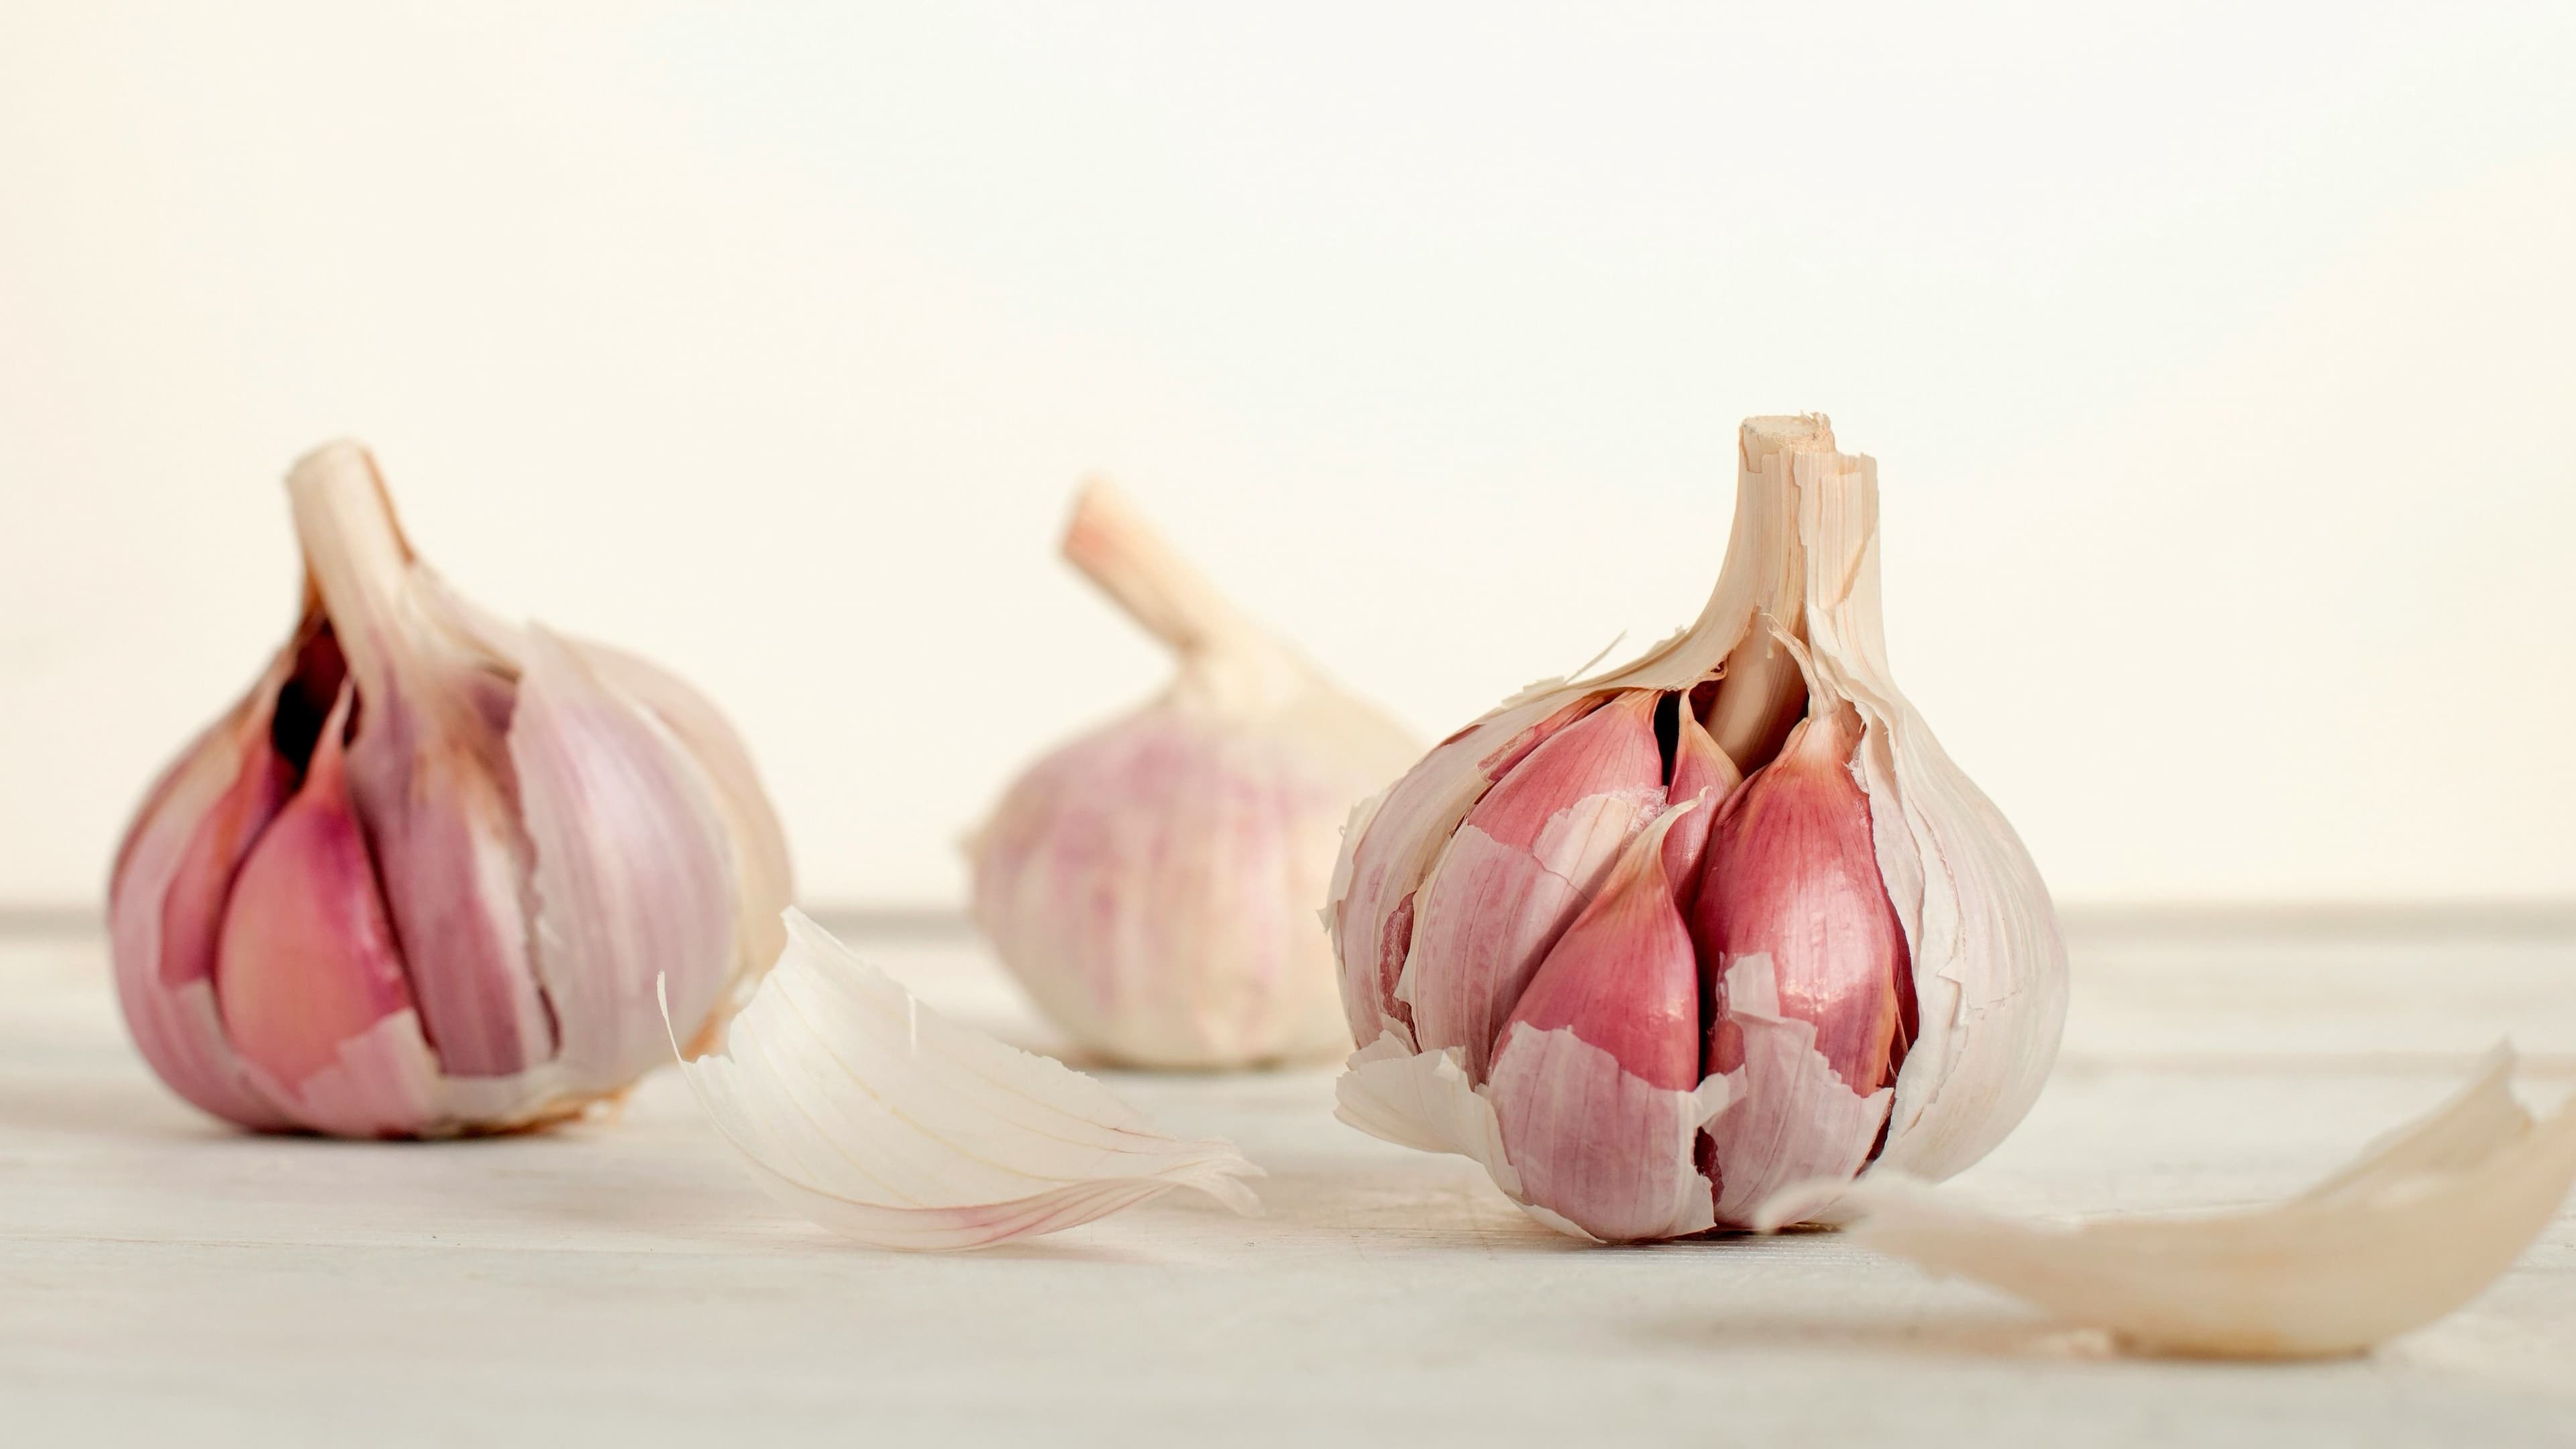 What Is Green Garlic? Know Its Health Benefits